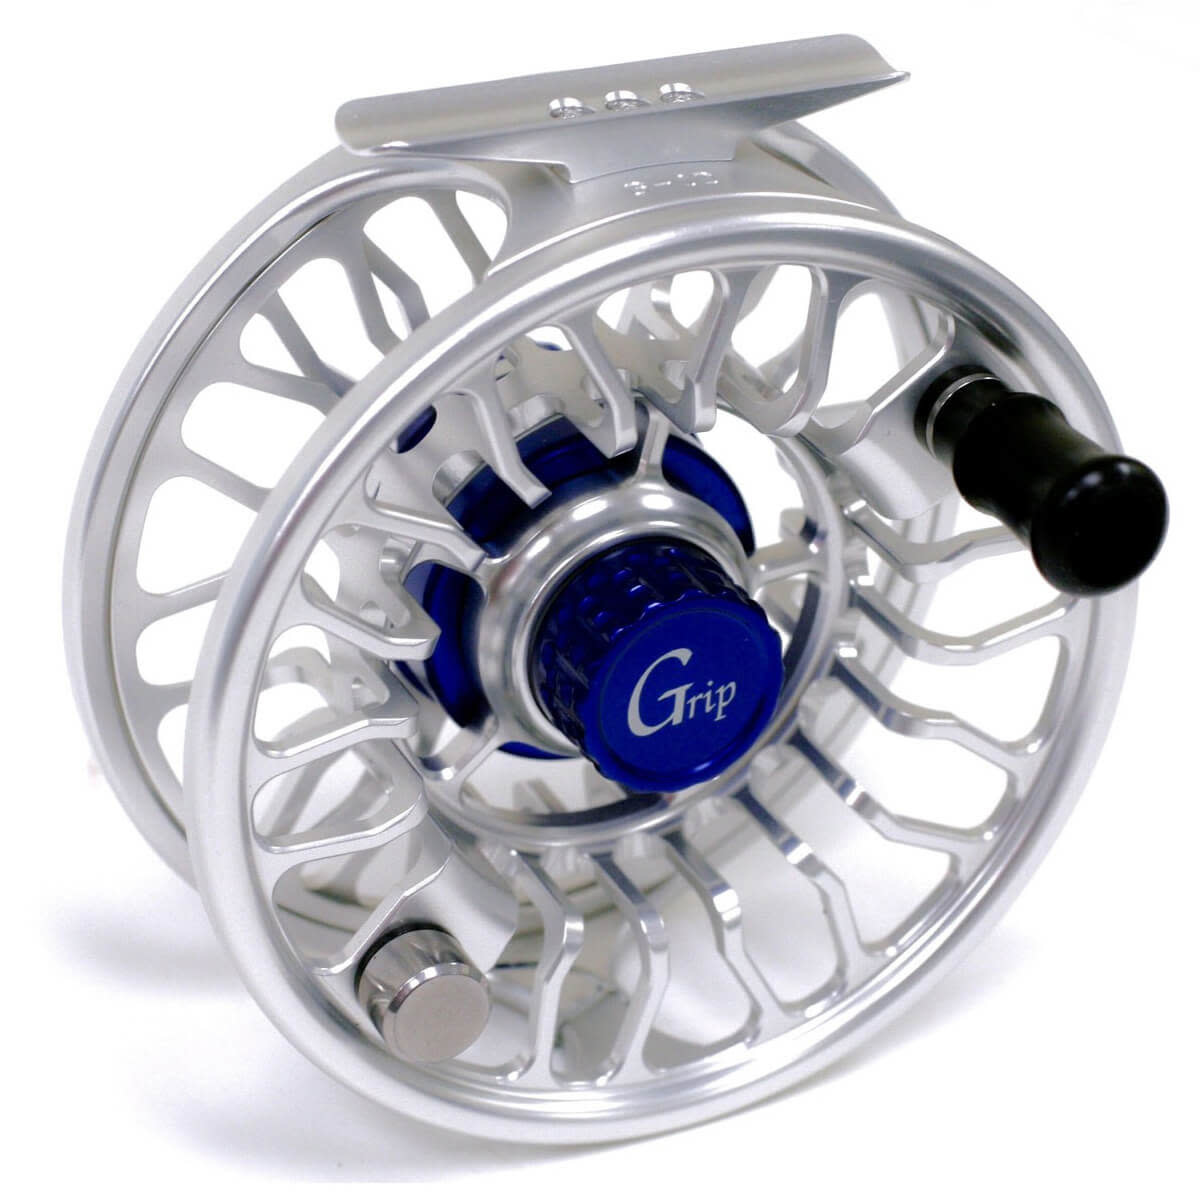 Galvan Grip - Tight Lines Fly Fishing Co.